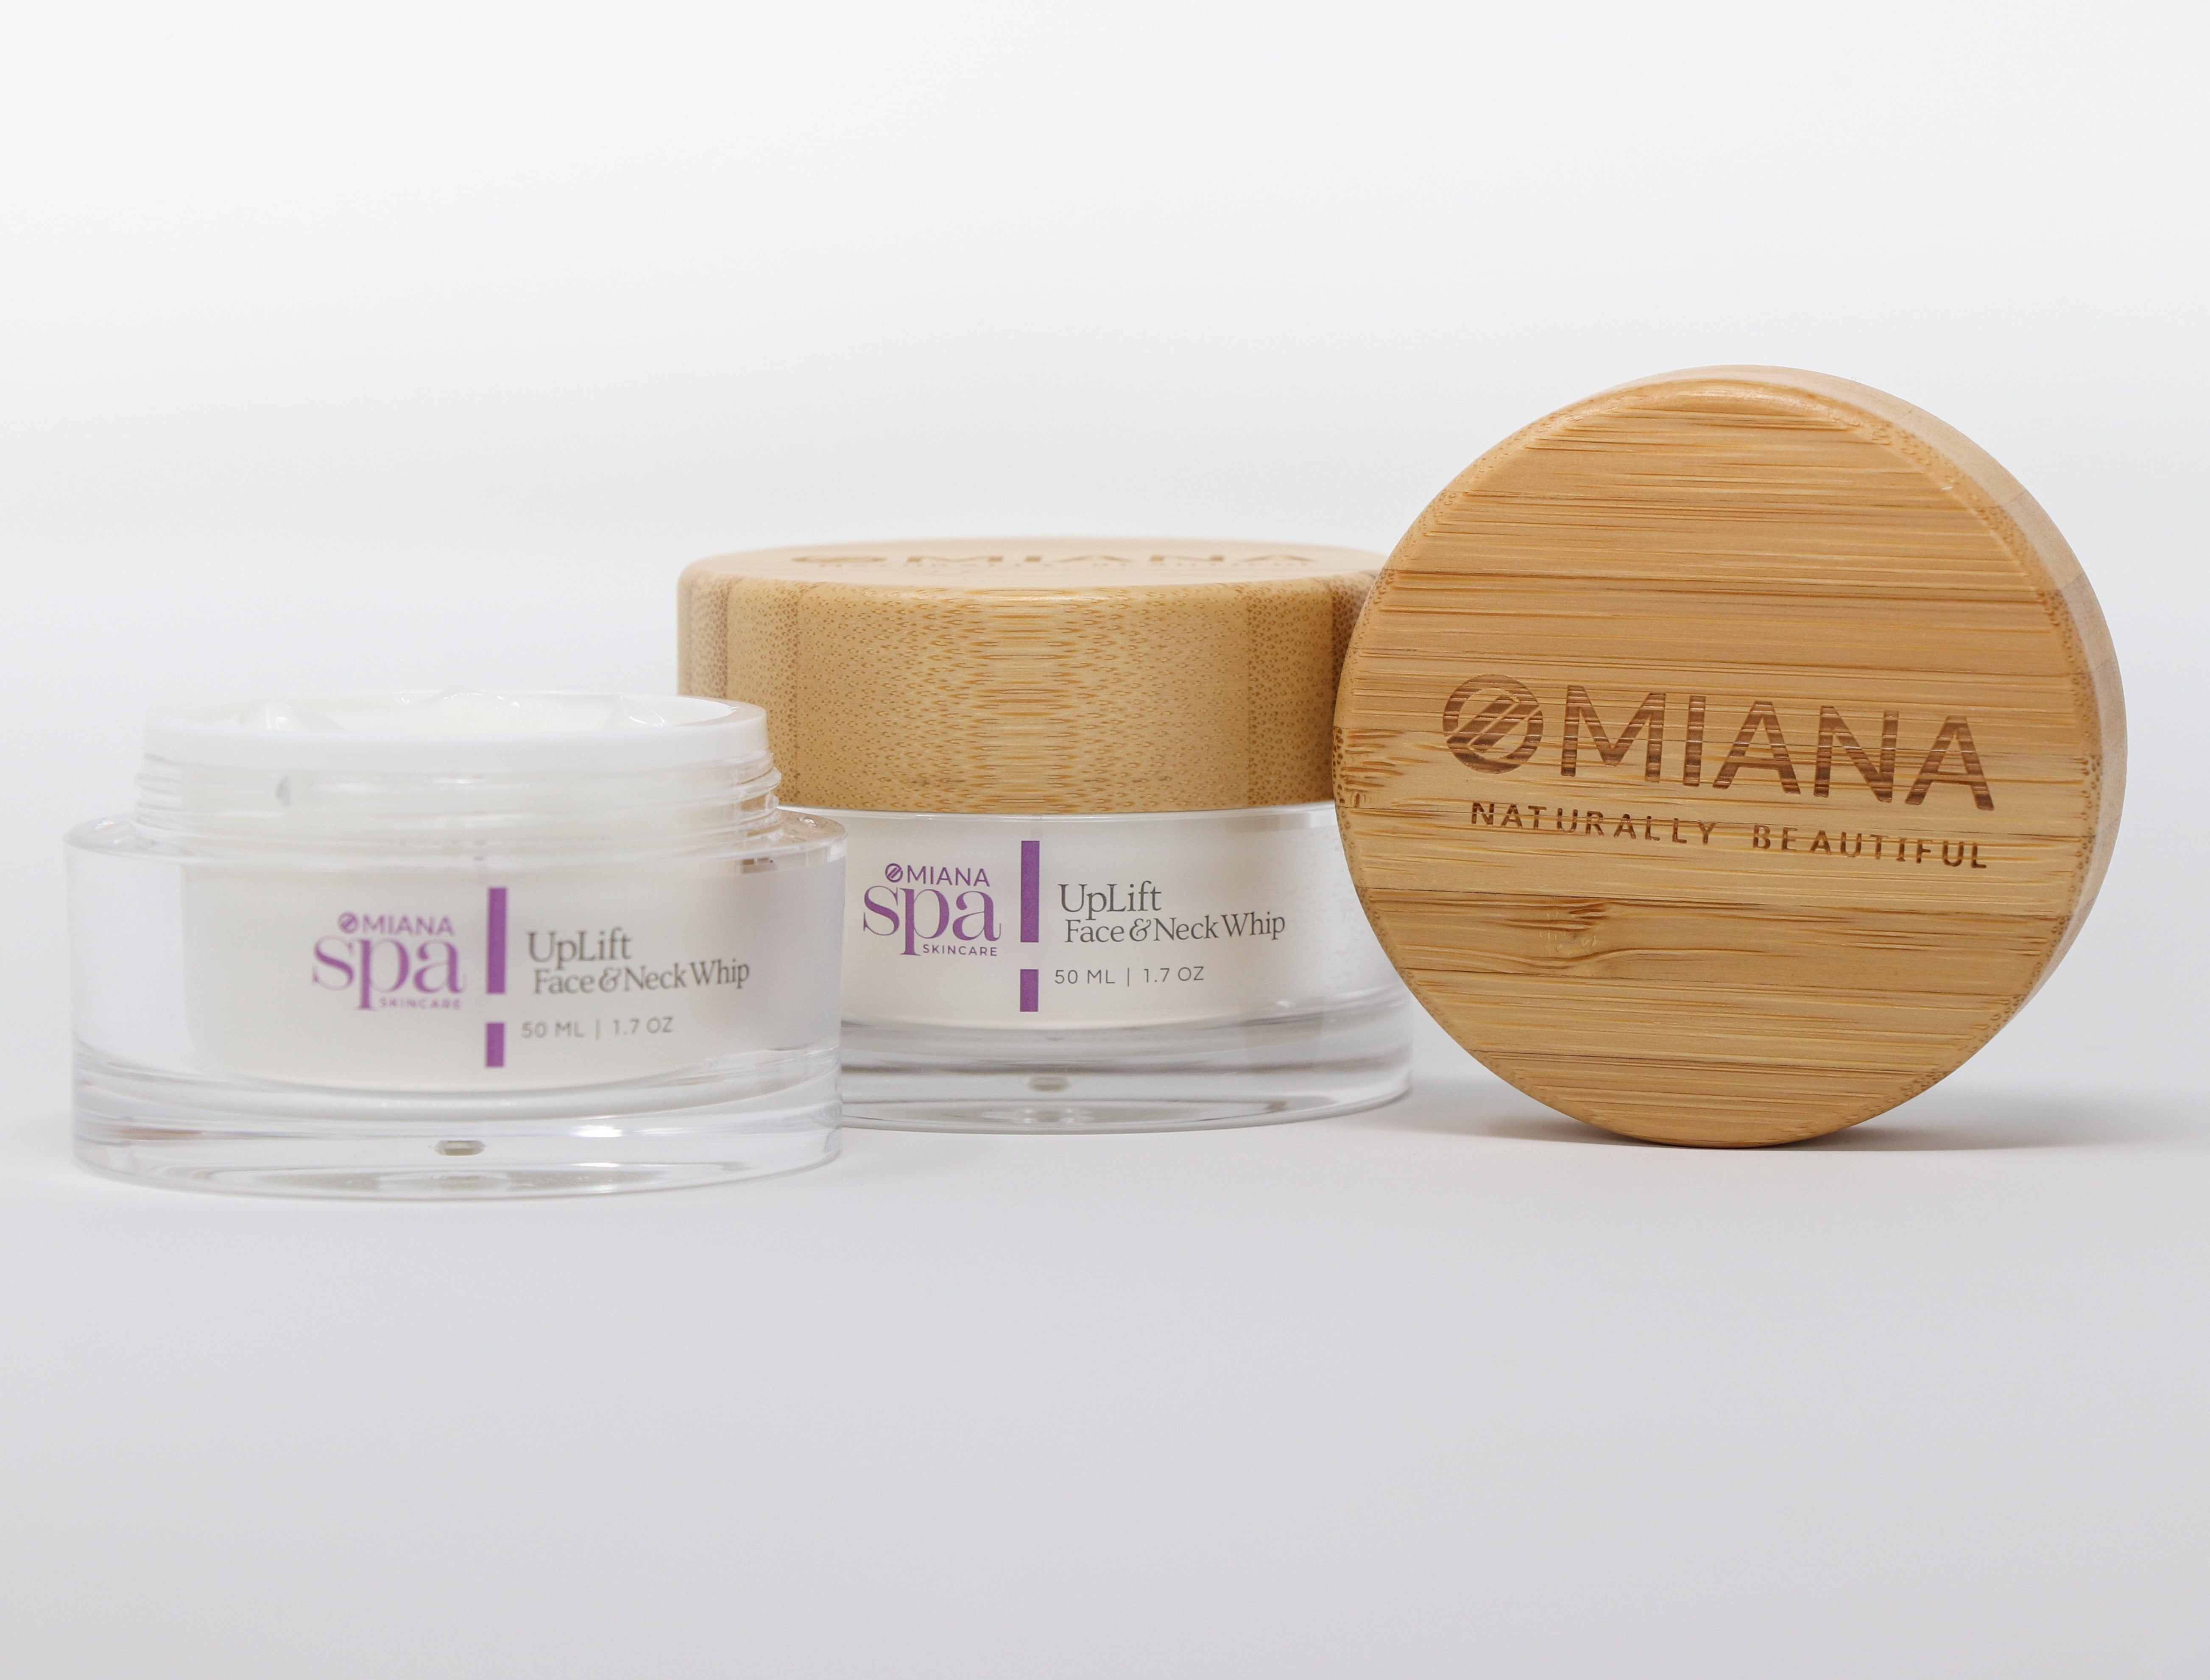 UpLift Face & Neck Whip - 100% Free From GMOs, Toxins, Artificial Fragrances, & More by Omiana